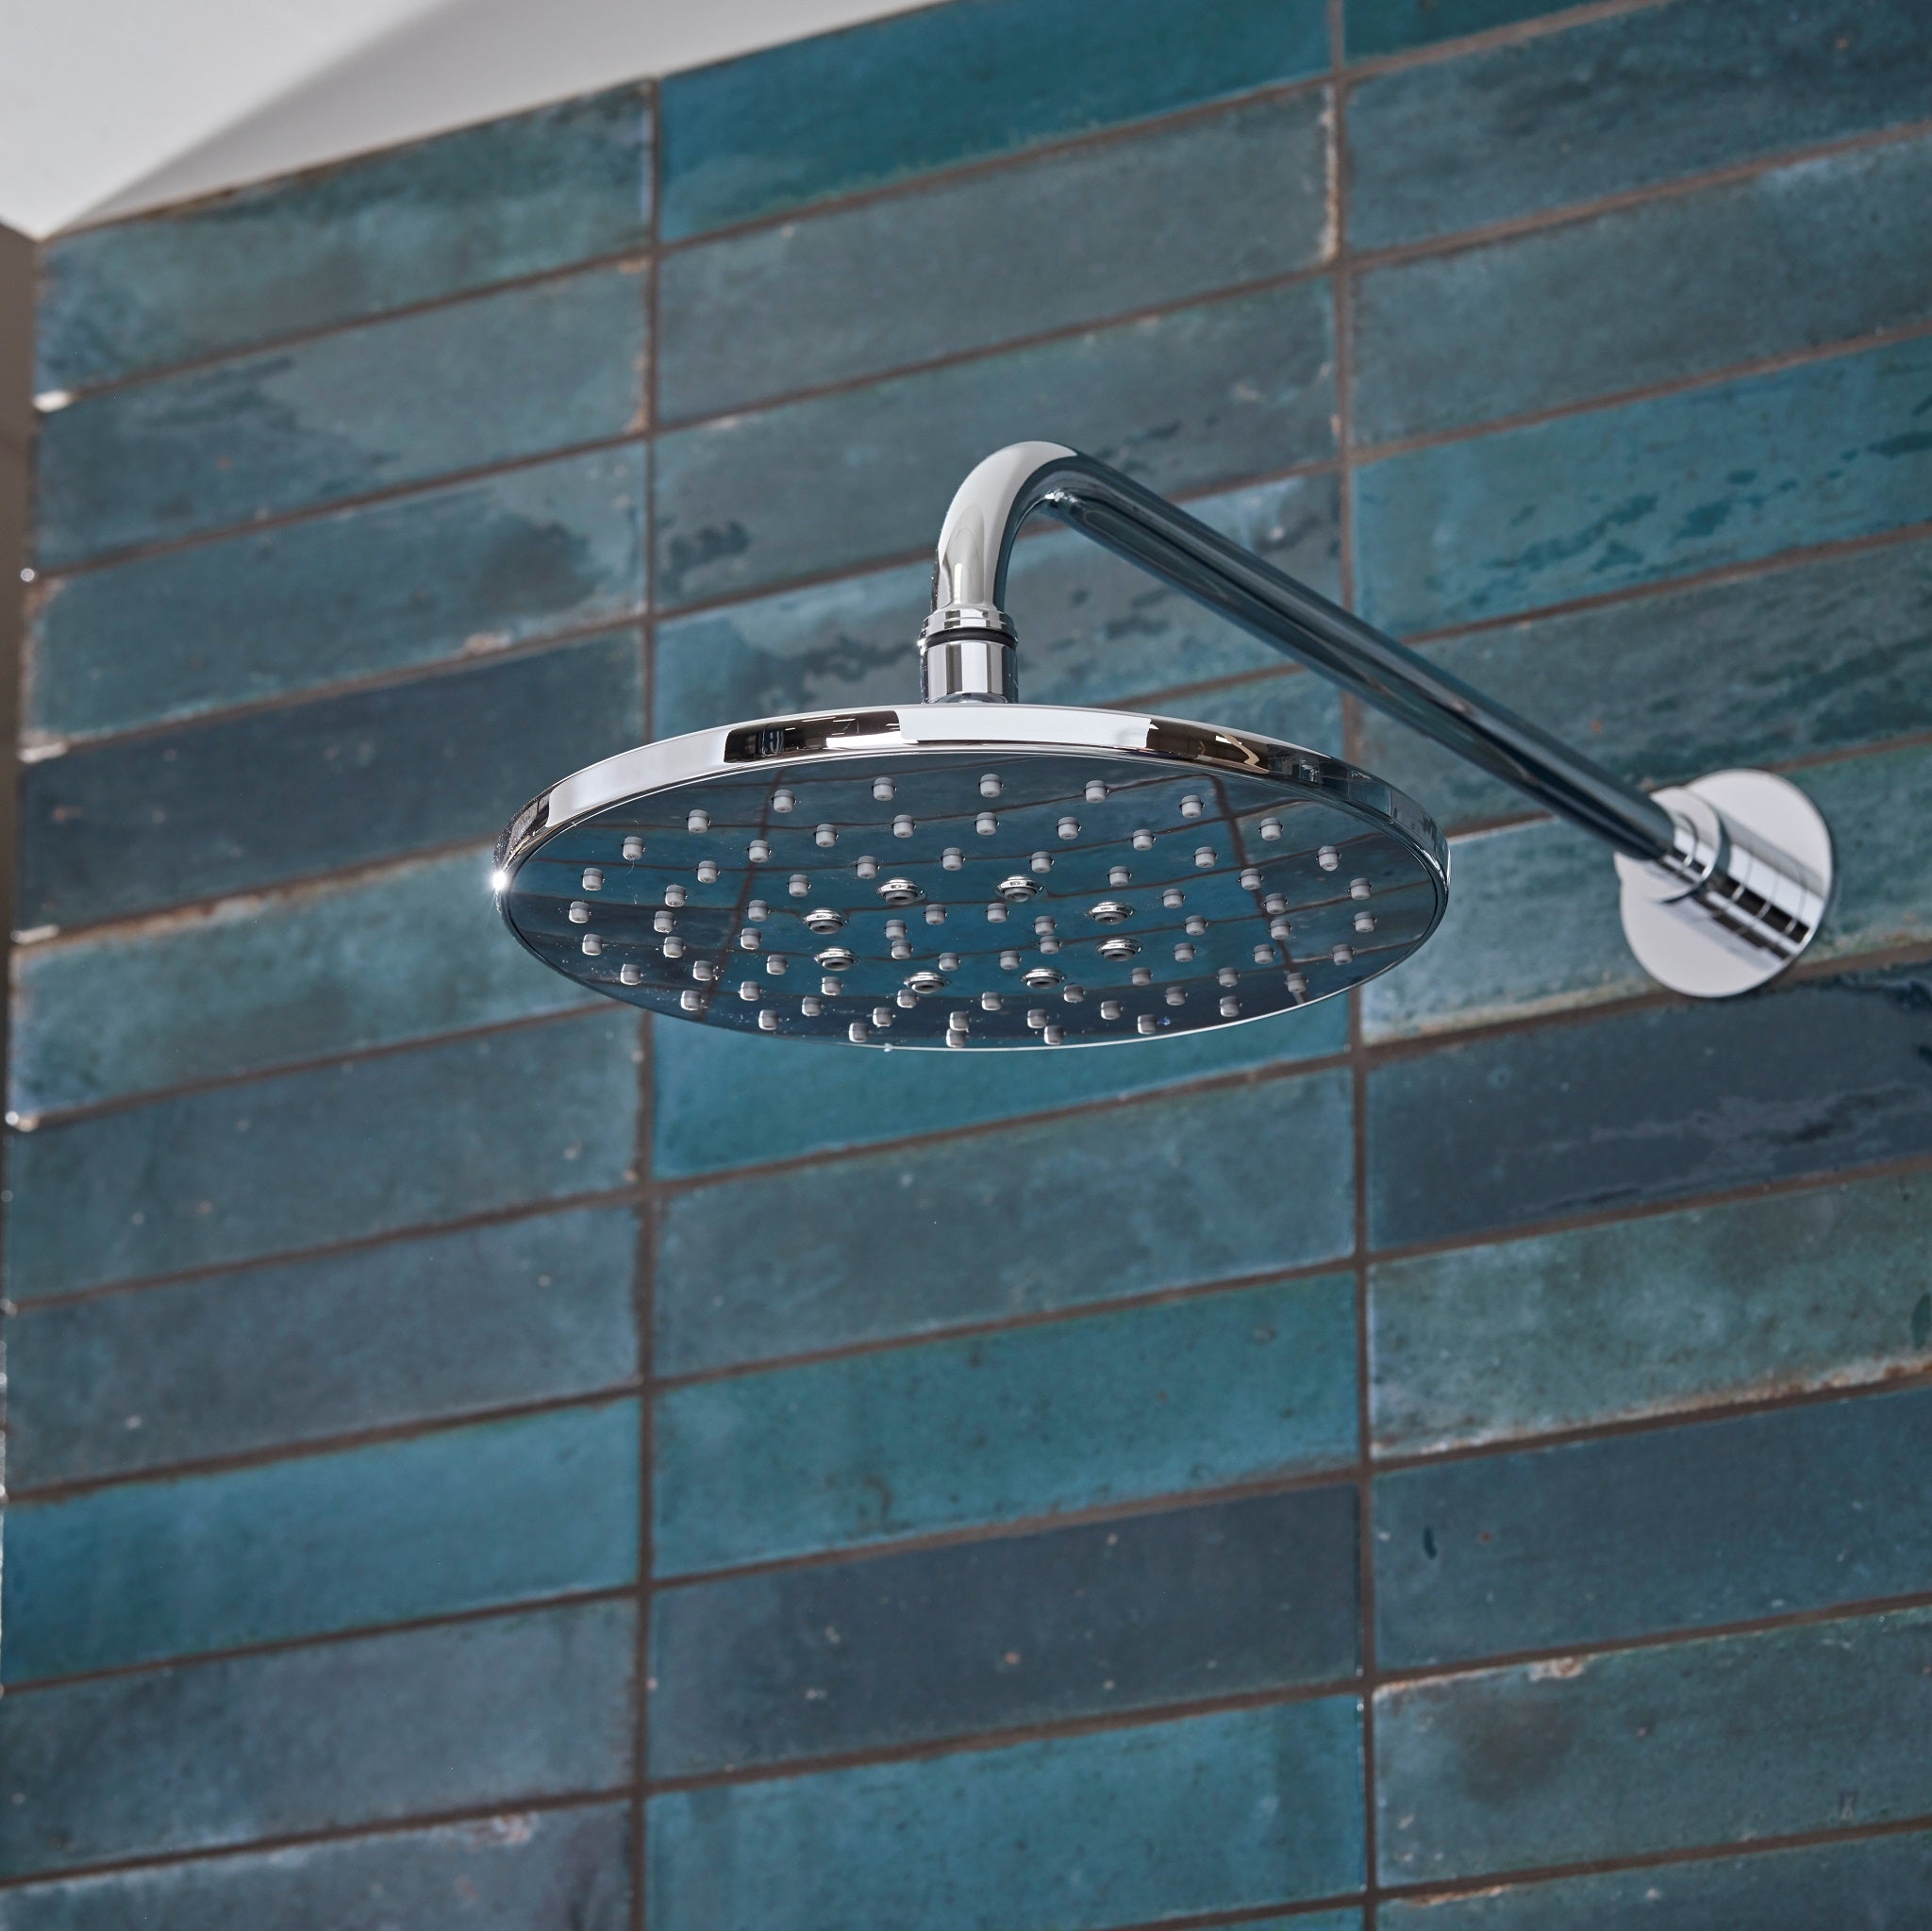 Tavistock Axiom Dual Function Push Button Shower System With Head And Outlet up close shower head against blue tiling SAX2549